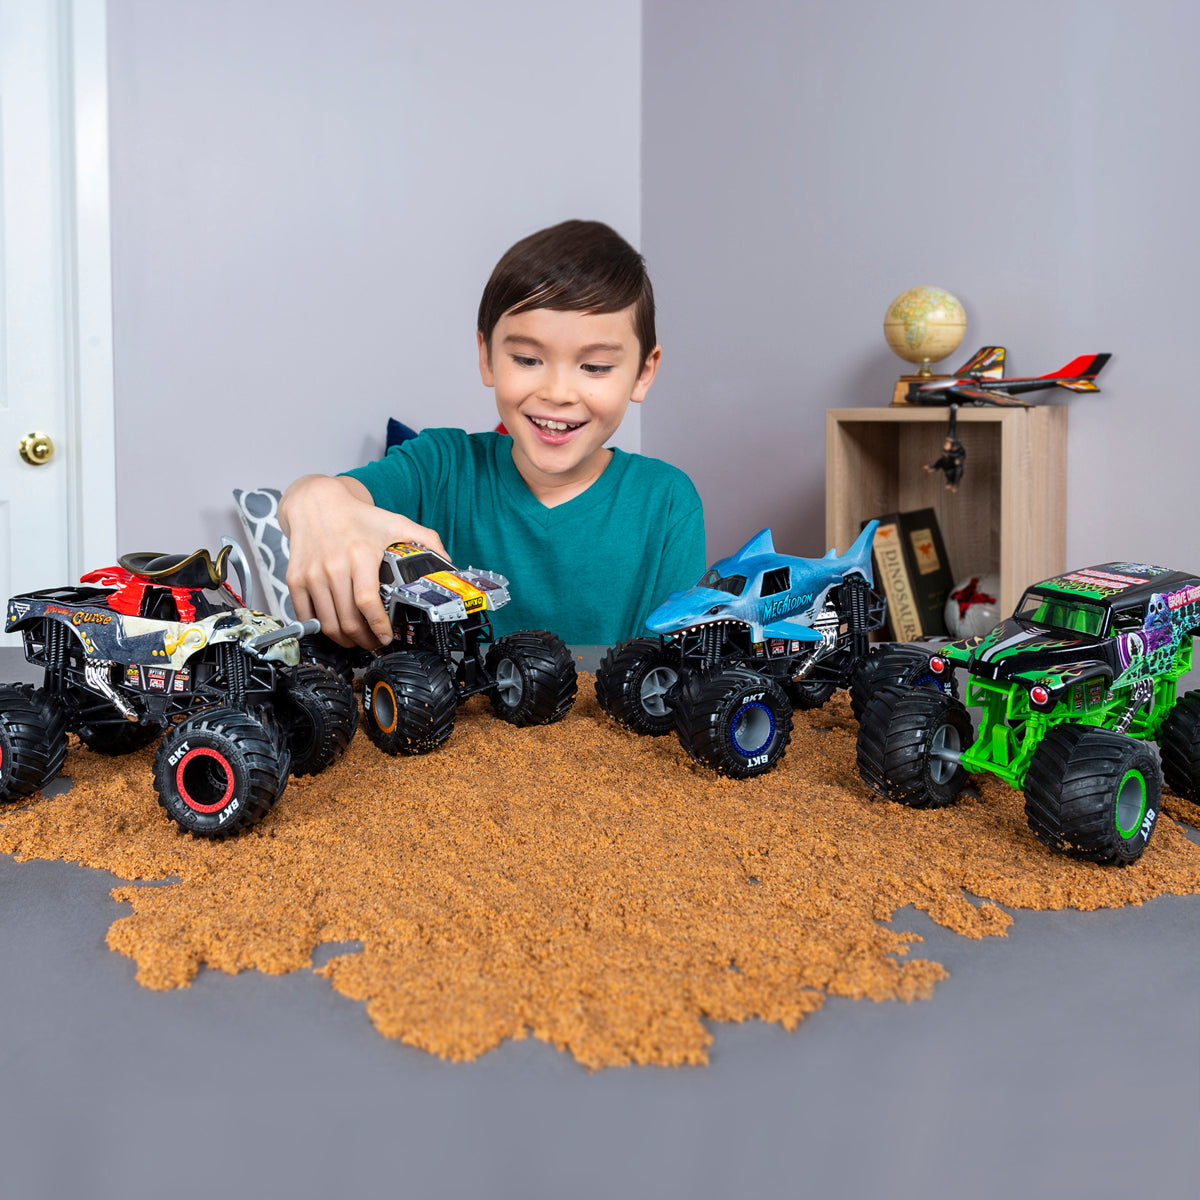  Monster Jam, Official Max D Monster Truck, Die-Cast Vehicle,  1:24 Scale : Toys & Games